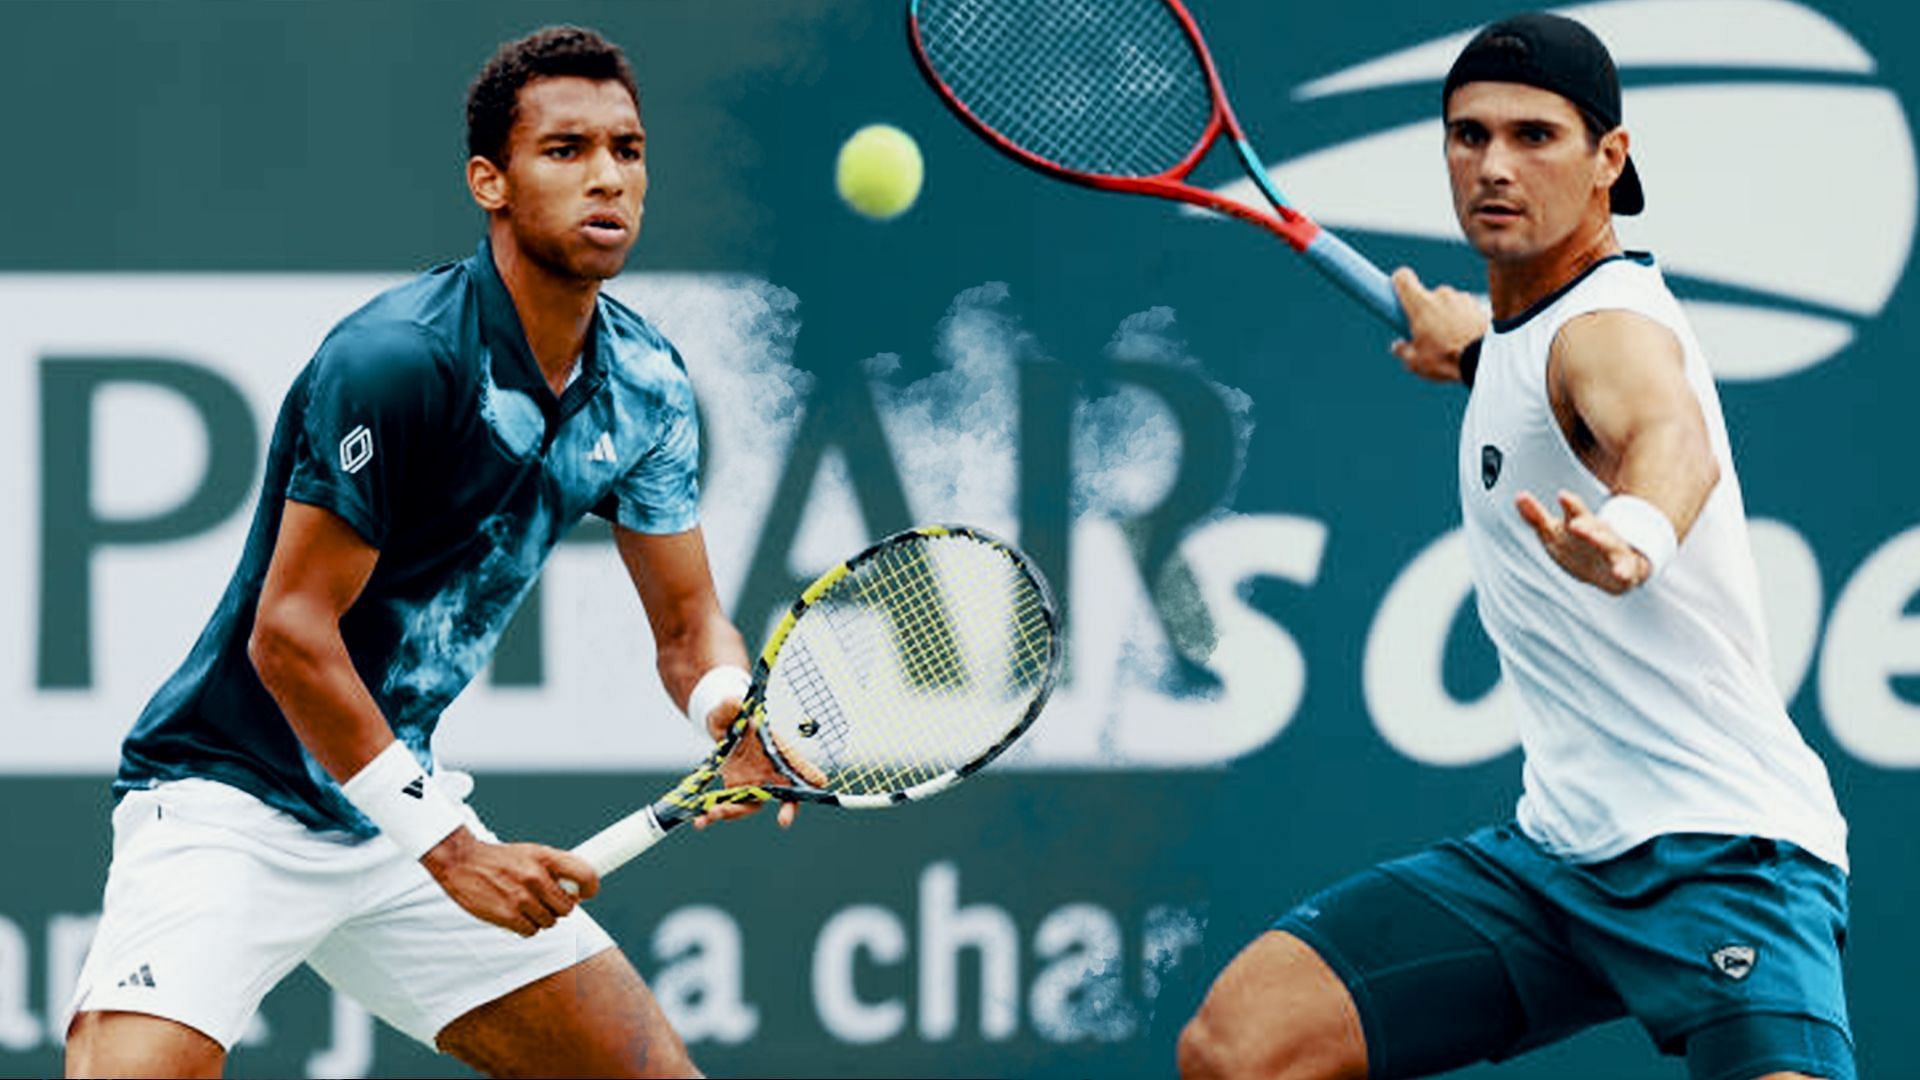 Japan Open 2023: Felix Auger-Aliassime vs Marcos Giron preview, head-to-head, prediction, odds and pick